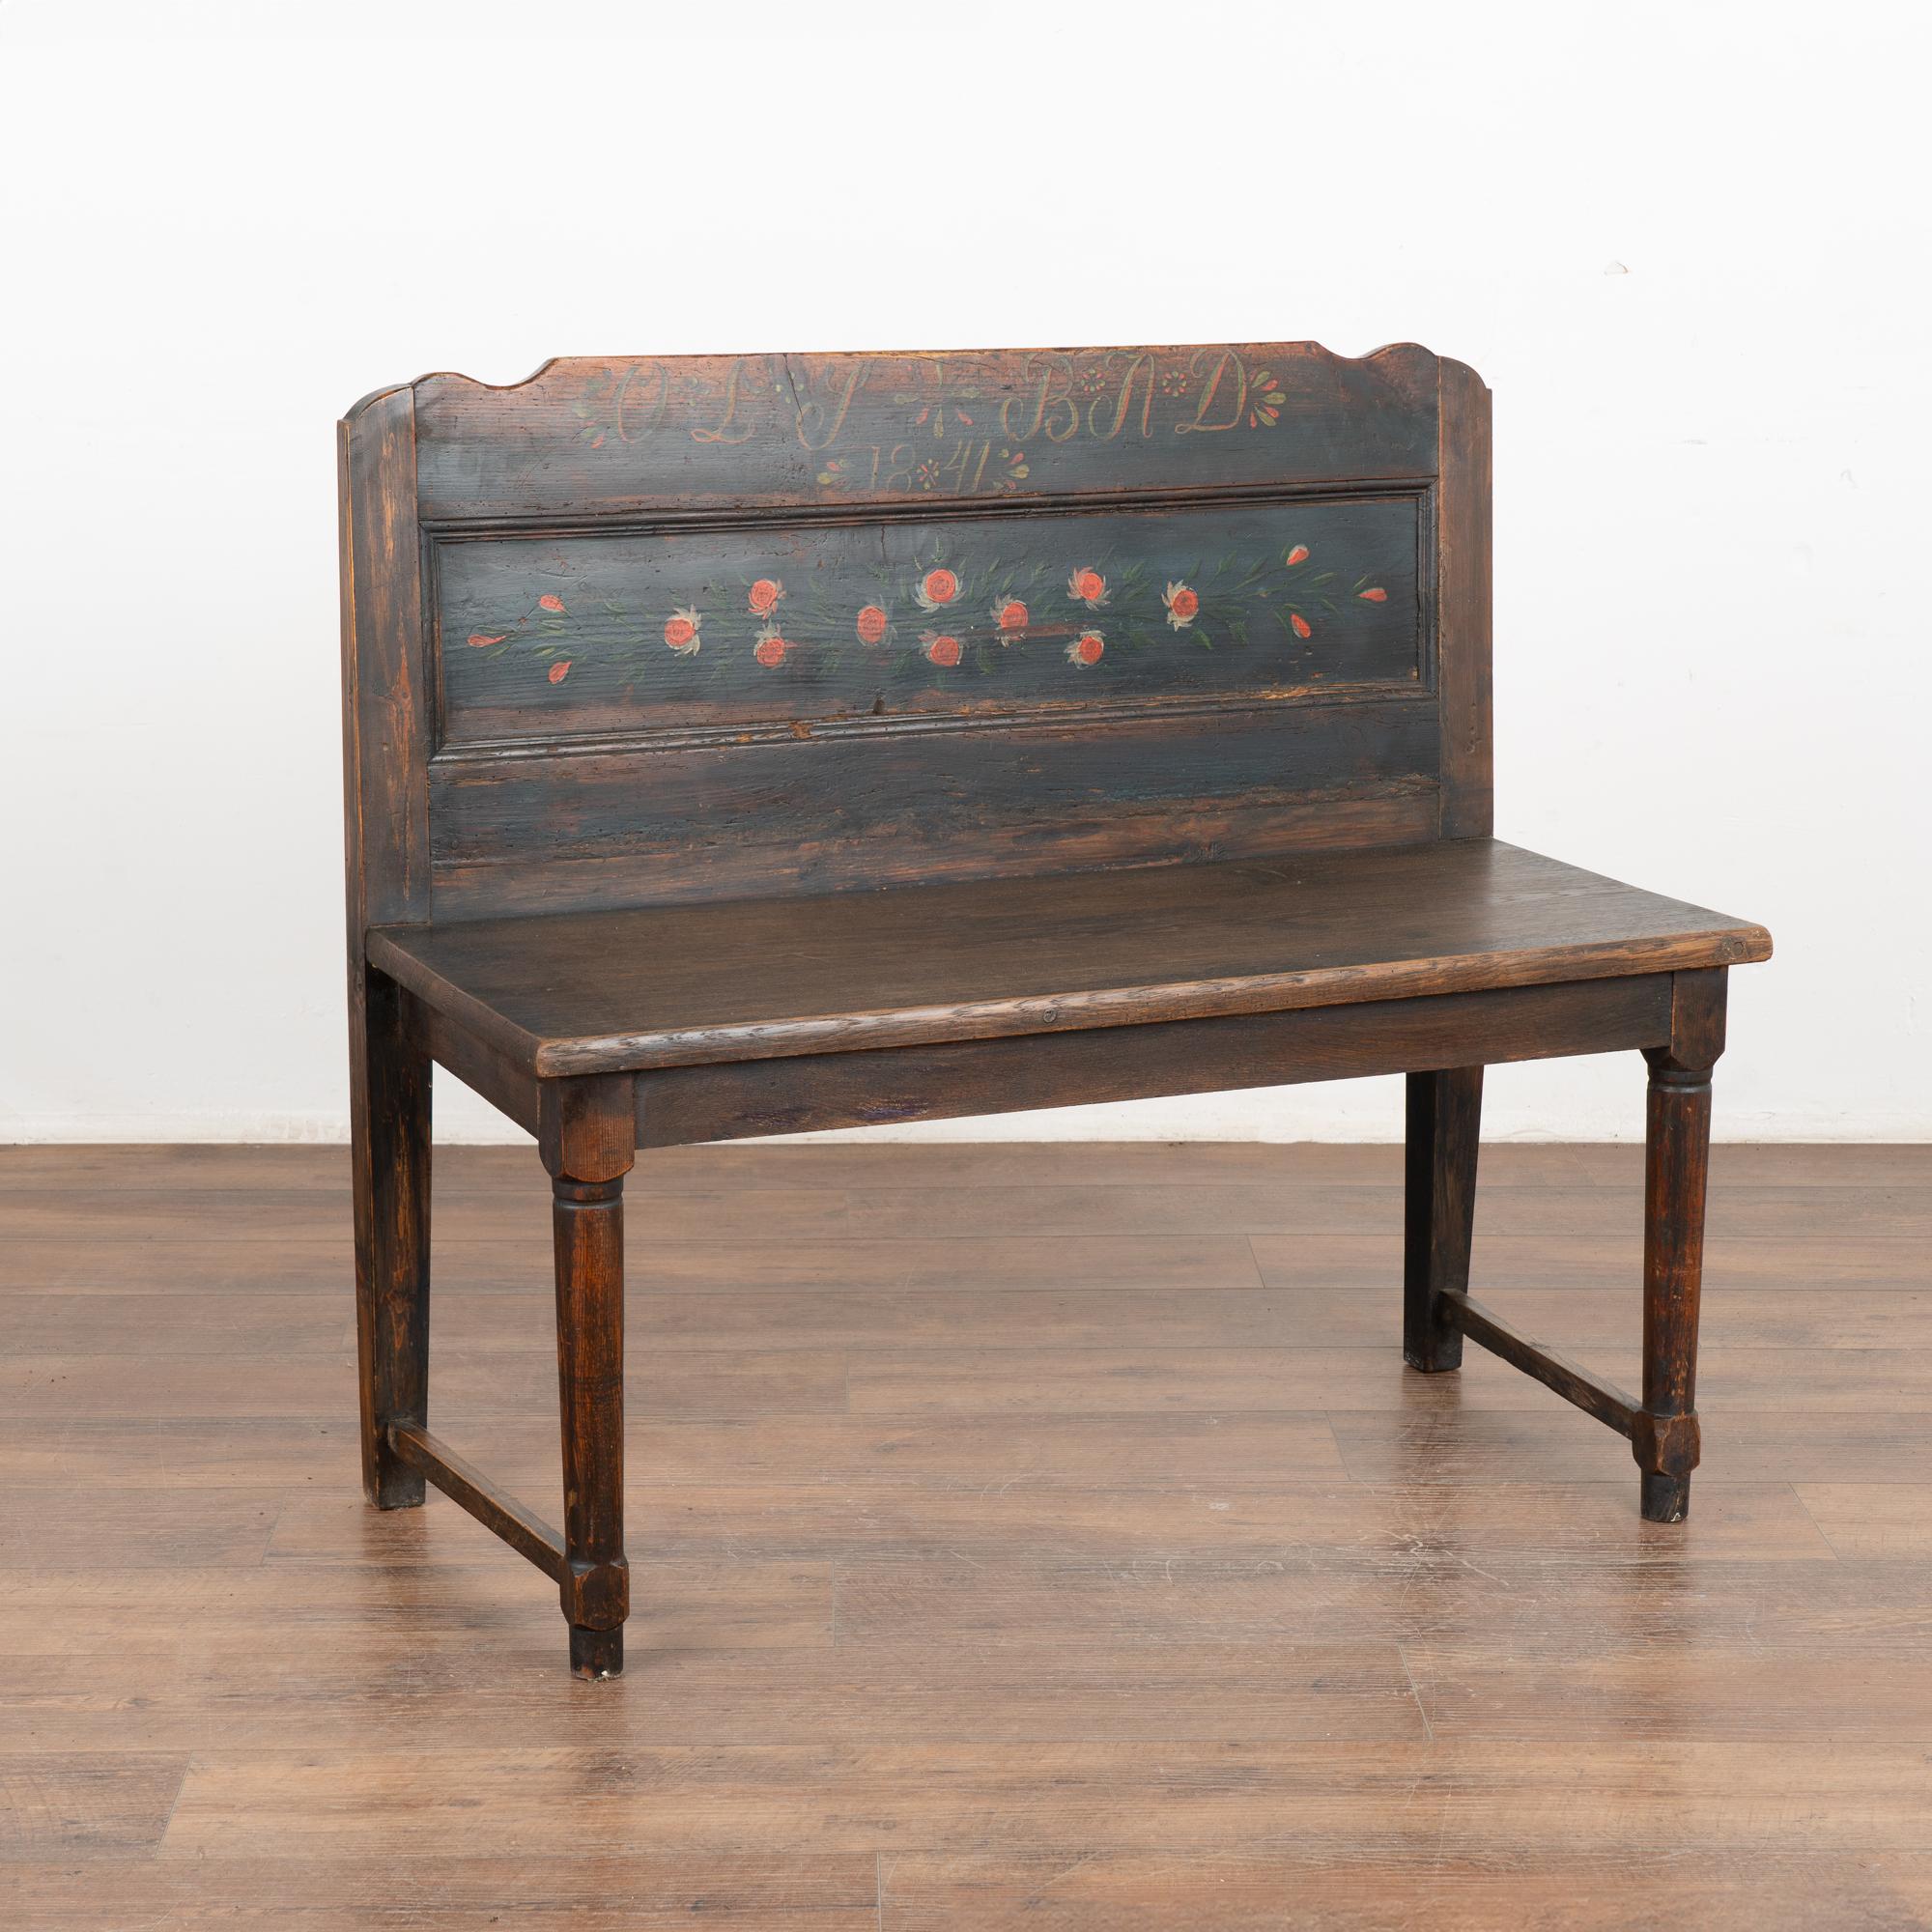 This delightful bench is a fun find due to its unique smaller scale at just over 3' long, perfect for a small space.
Original hand painted details include red flowers, date of 1841 against blue painted background of tall back. Seat and legs appear